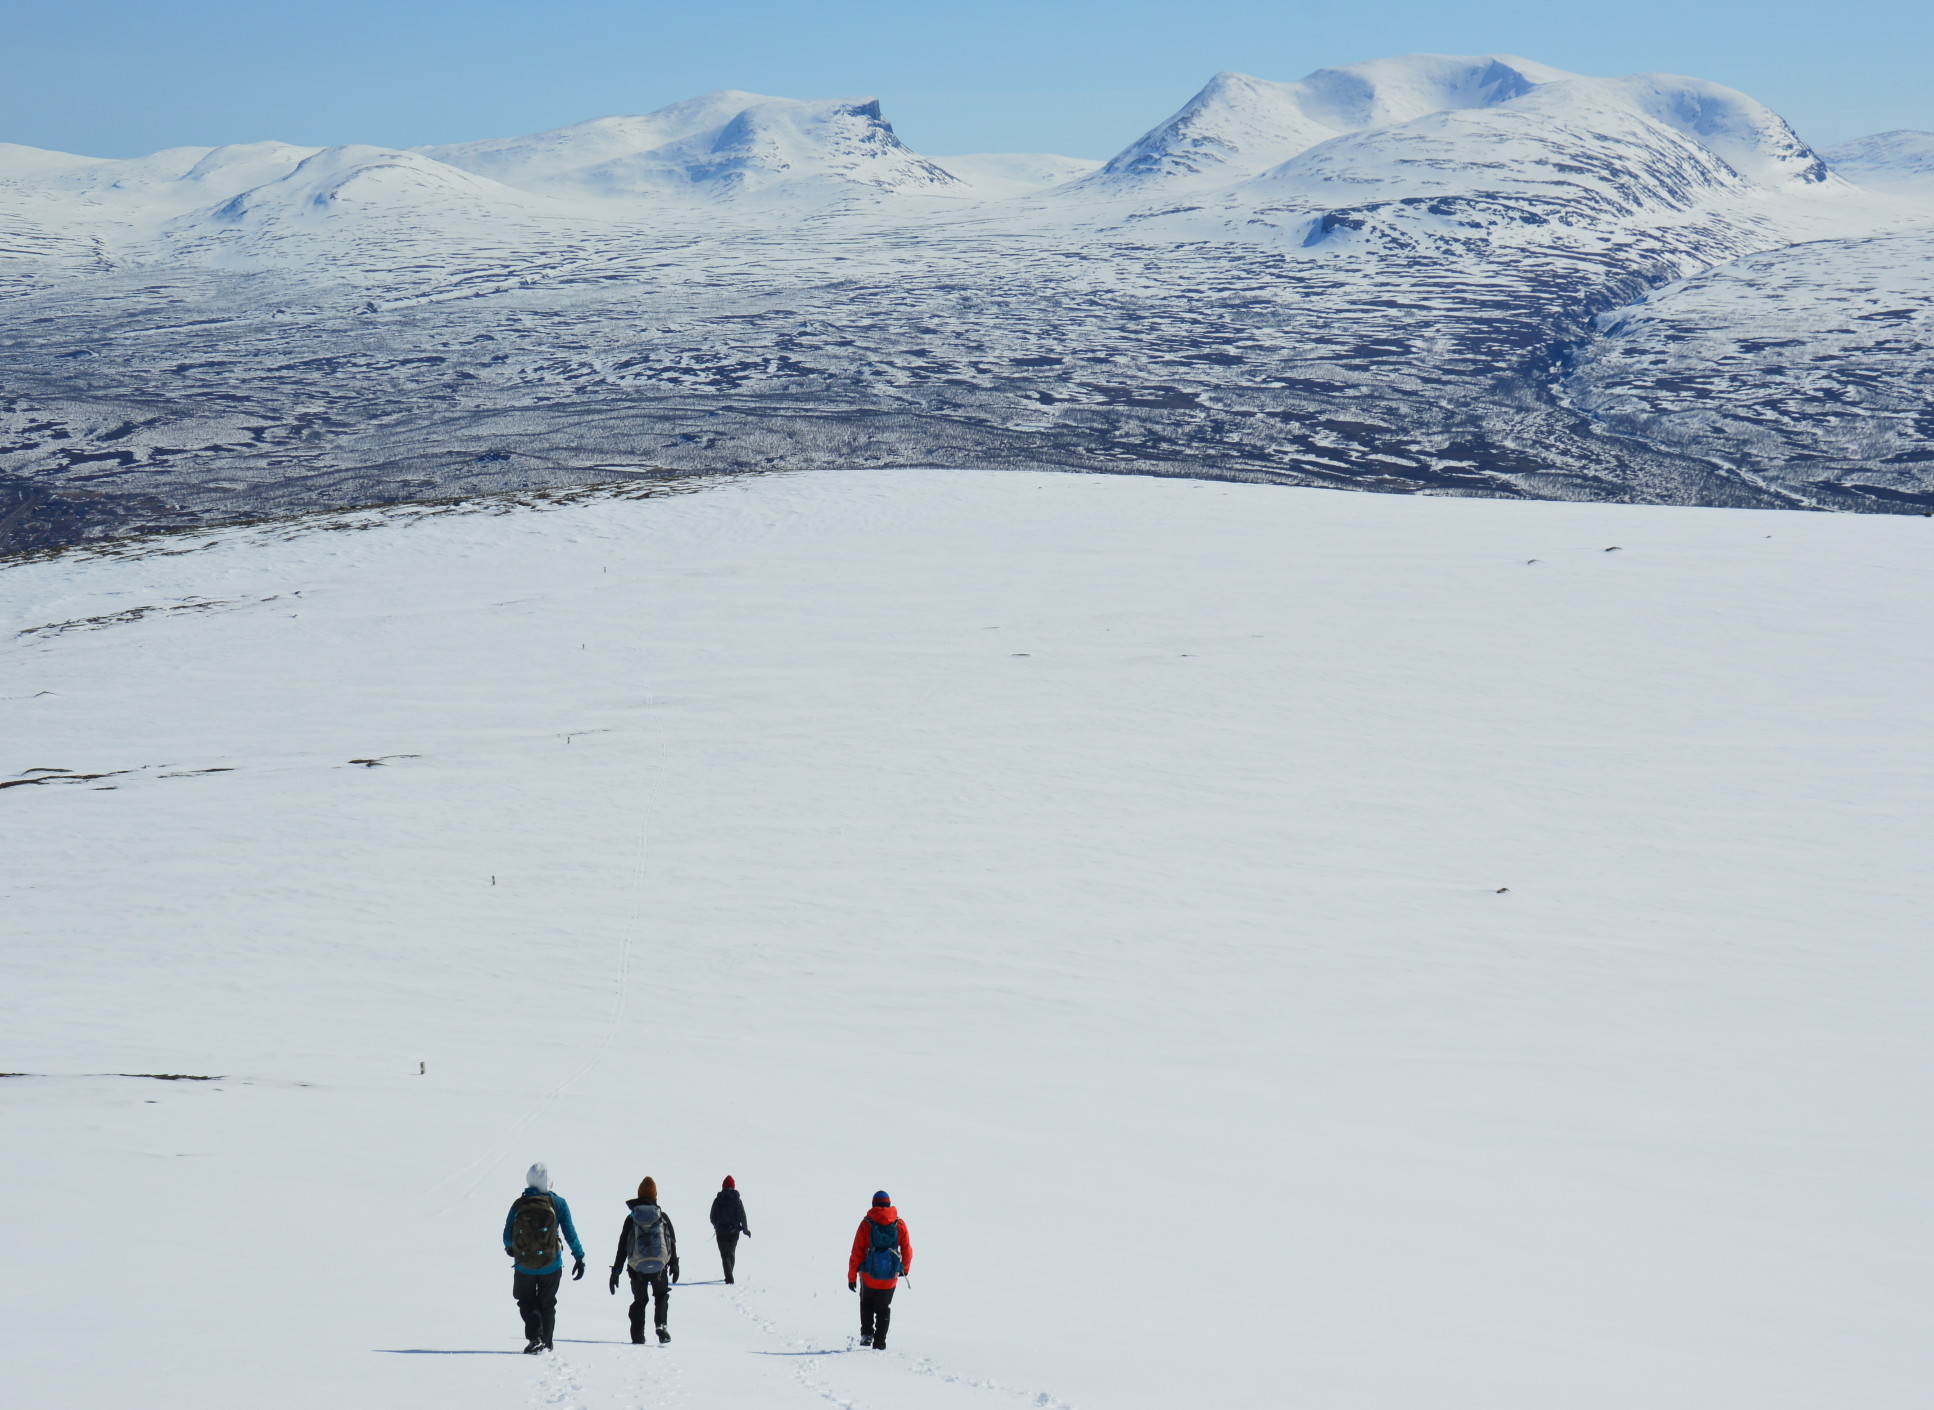 Four figures hiking across snow, with a wide tundra landscape in the distance